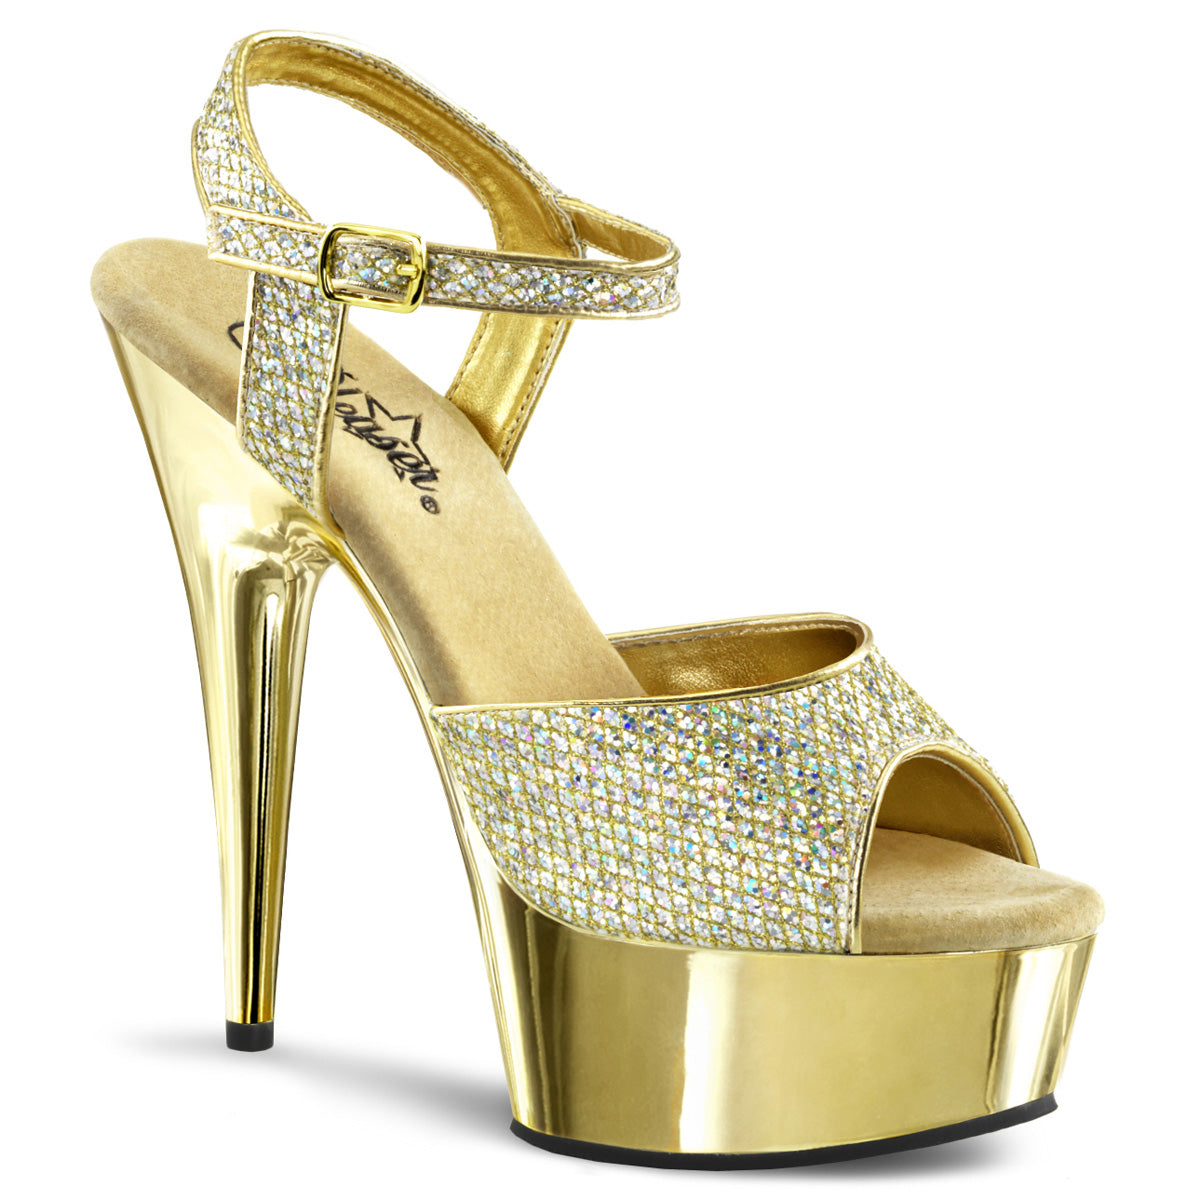 DELIGHT-609G 6 Inch Heel Gold Glitter Pole Dancing Platforms-Pleaser- Sexy Shoes